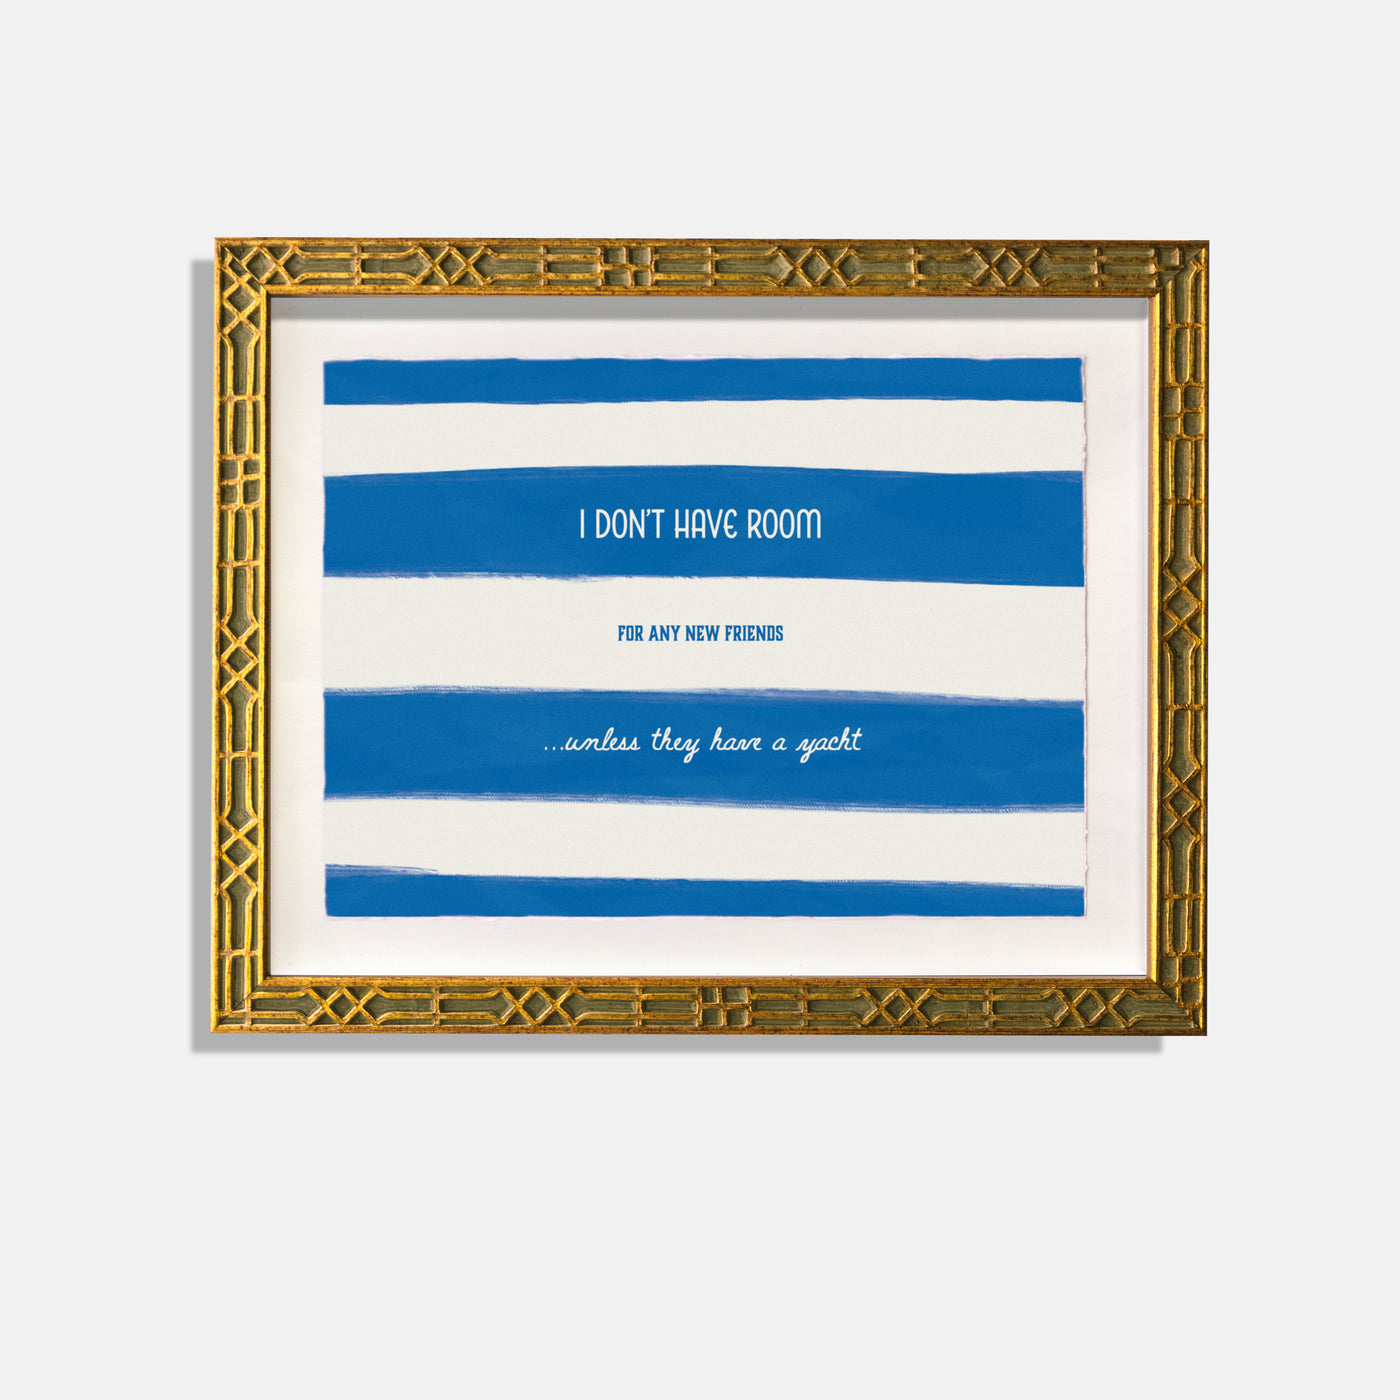 Watercolor printed image with blue and white stripes floating in a gold frame.. I dont have room for any new friends... unless they have a yacht